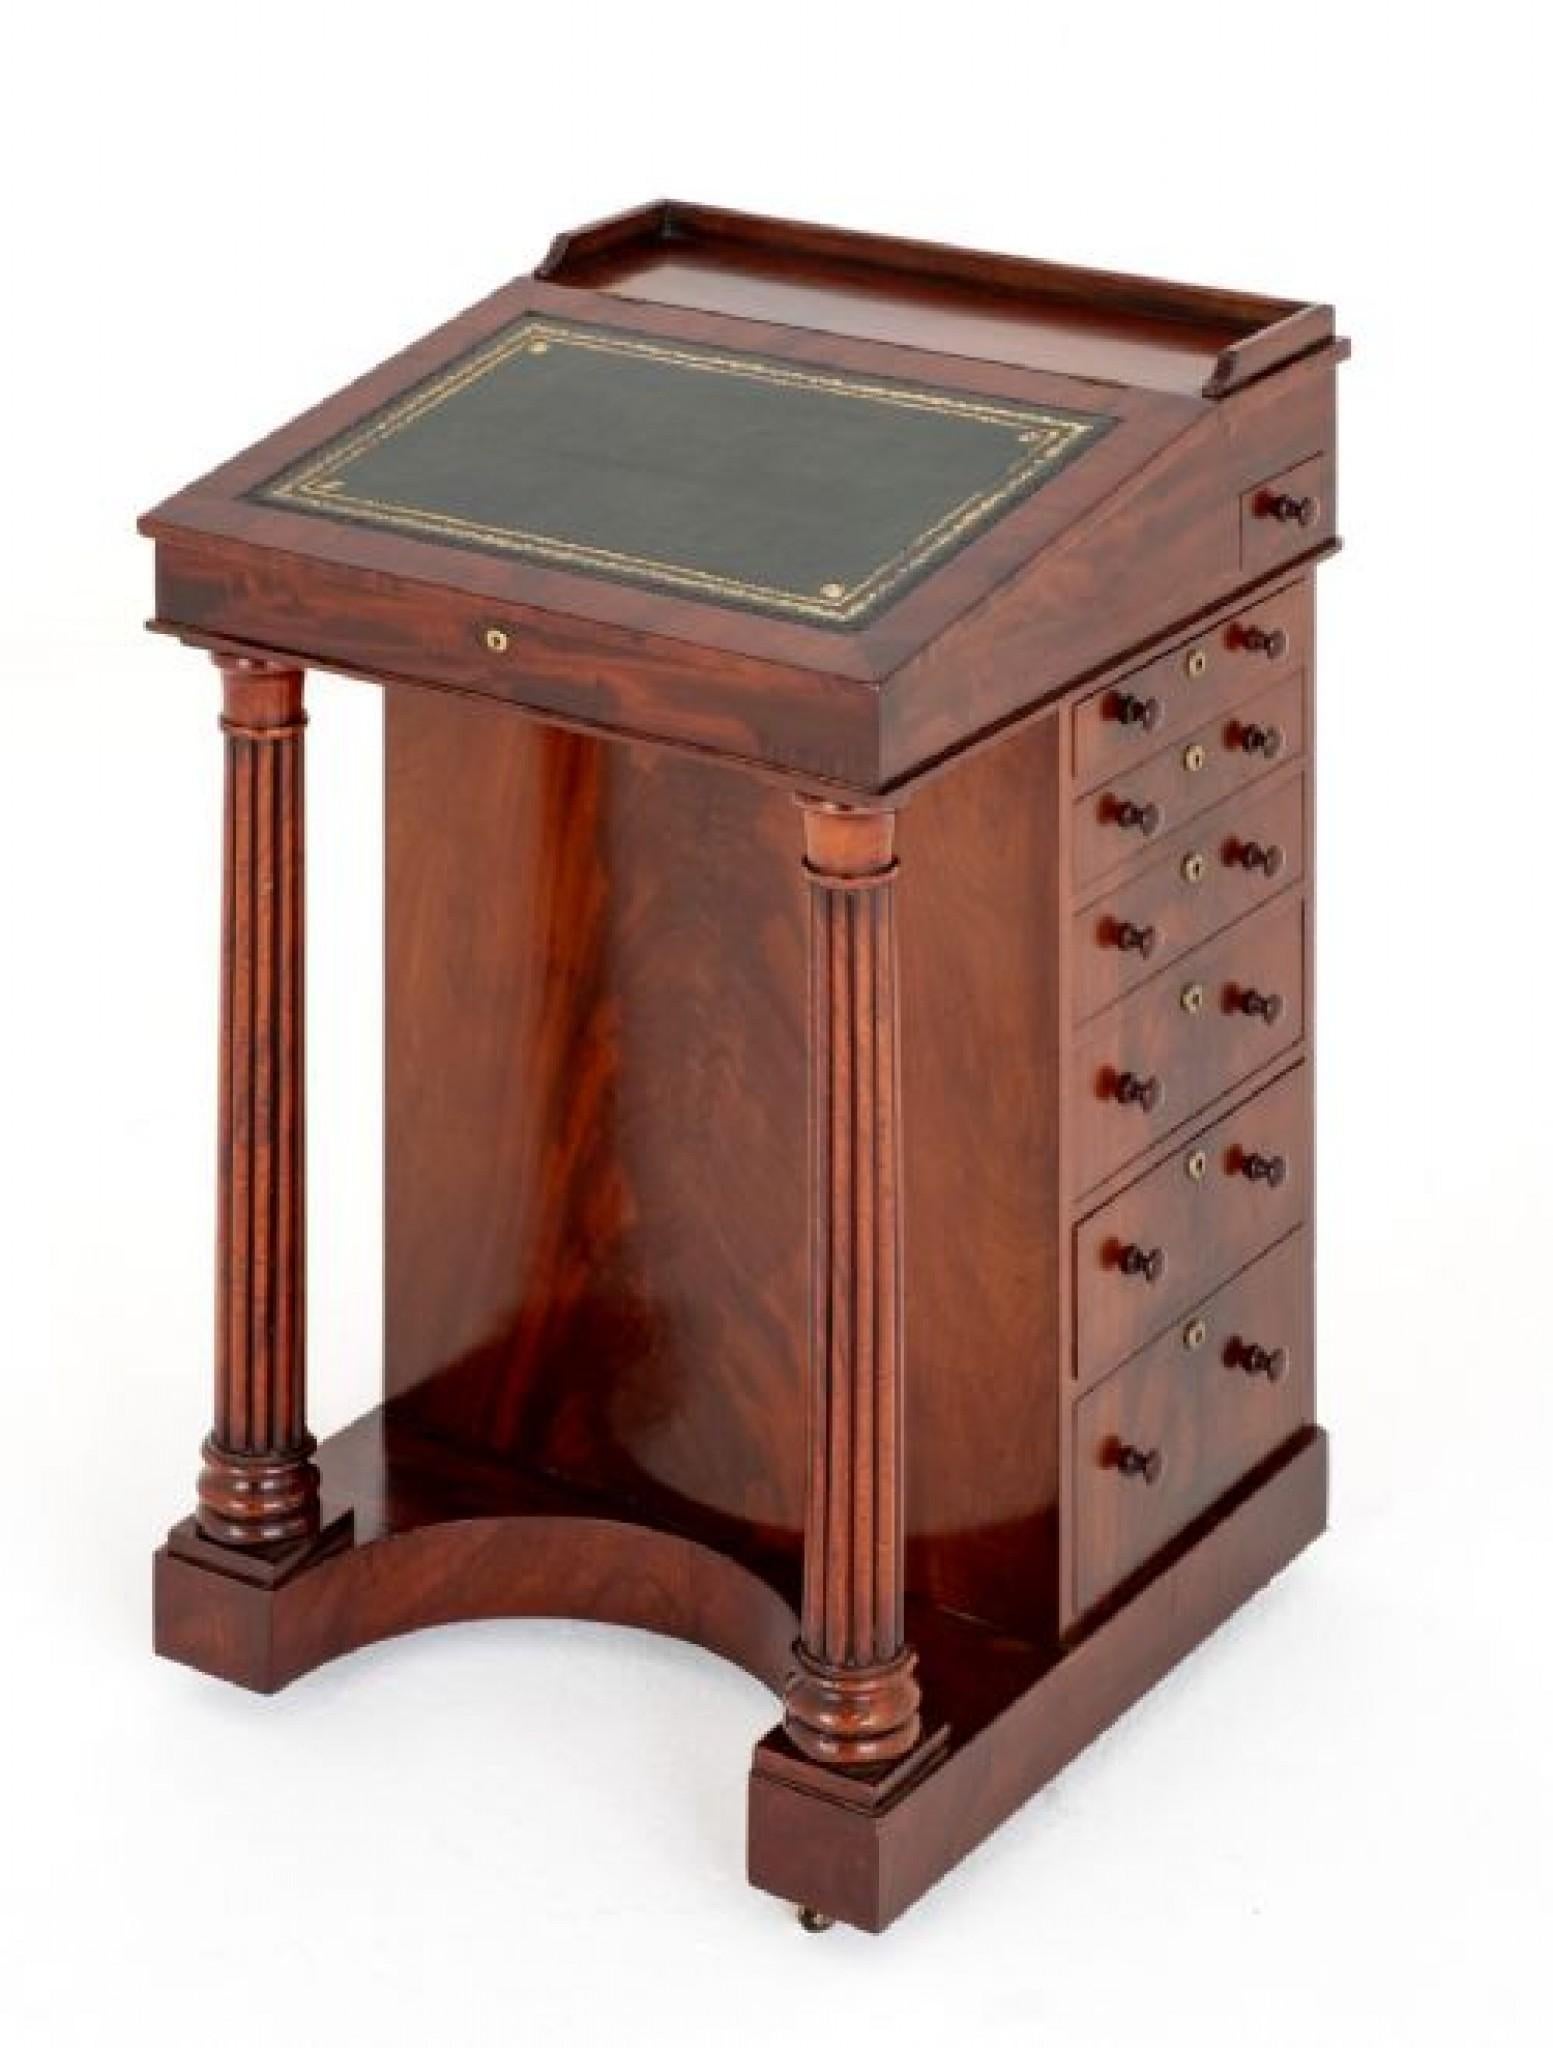 Regency Mahogany Davenport.
This Davenport Features an arrangement of 6 Graduated Mahogany Lined Drawers to the Right Hand Side with Faux Drawers to the Reverse.
Period Regency
The Turned Columns Being of a Fluted Form.
The davenport also Features a